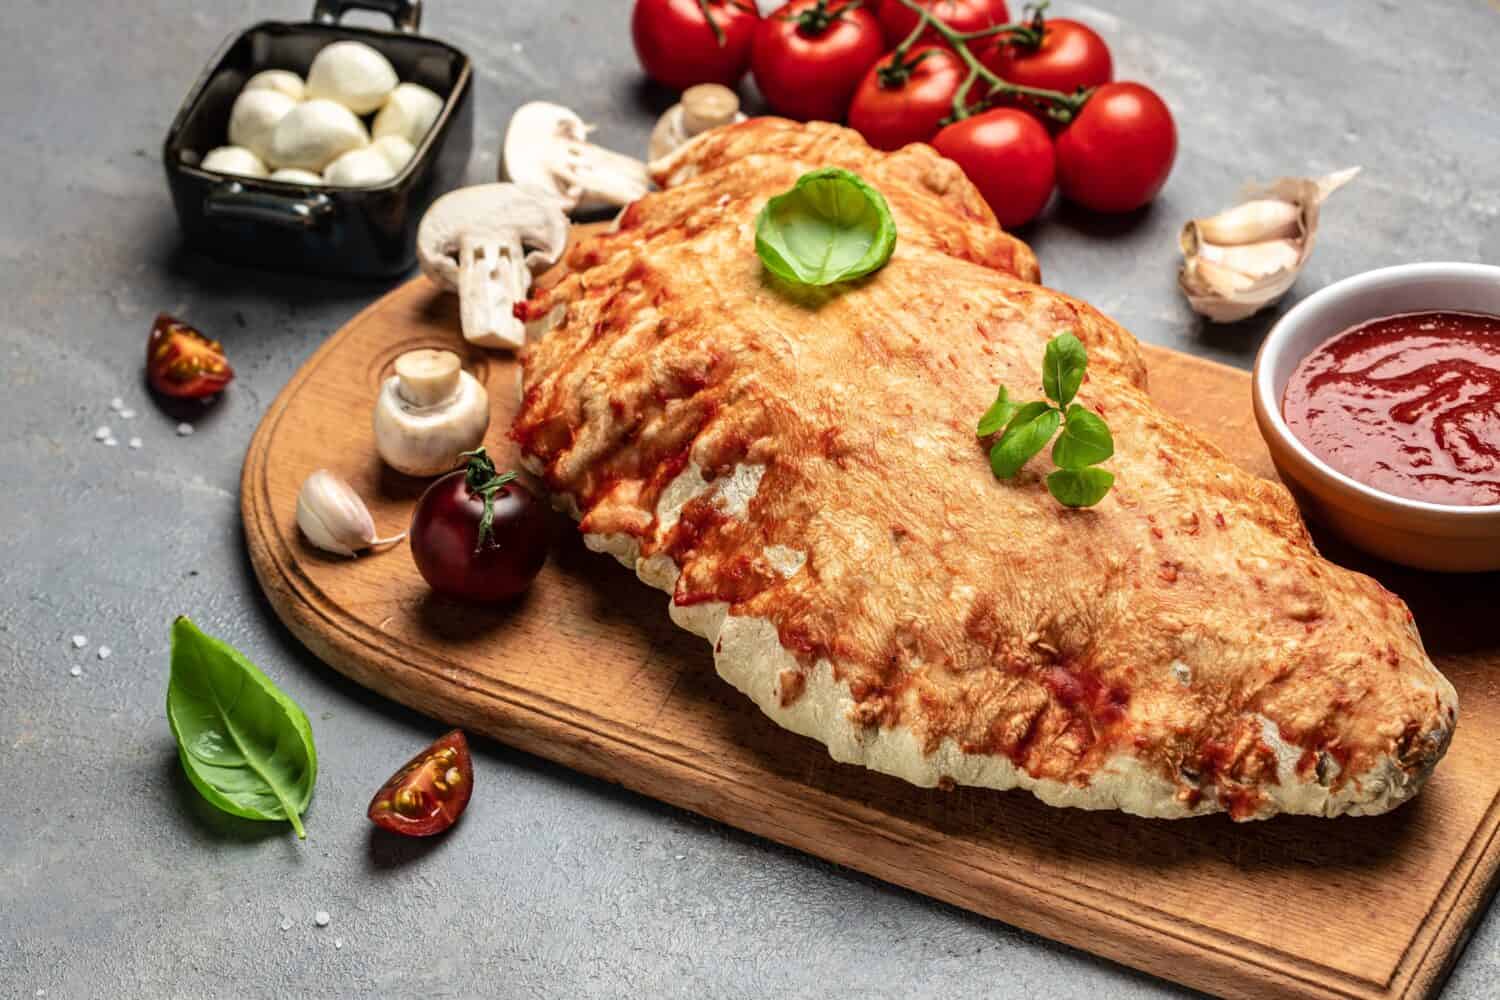 Calzone pizza with tomatoes, mozzarella, mushrooms and fresh basil, italian calzone vegetarian pizza, banner, menu, recipe place for text, top view.